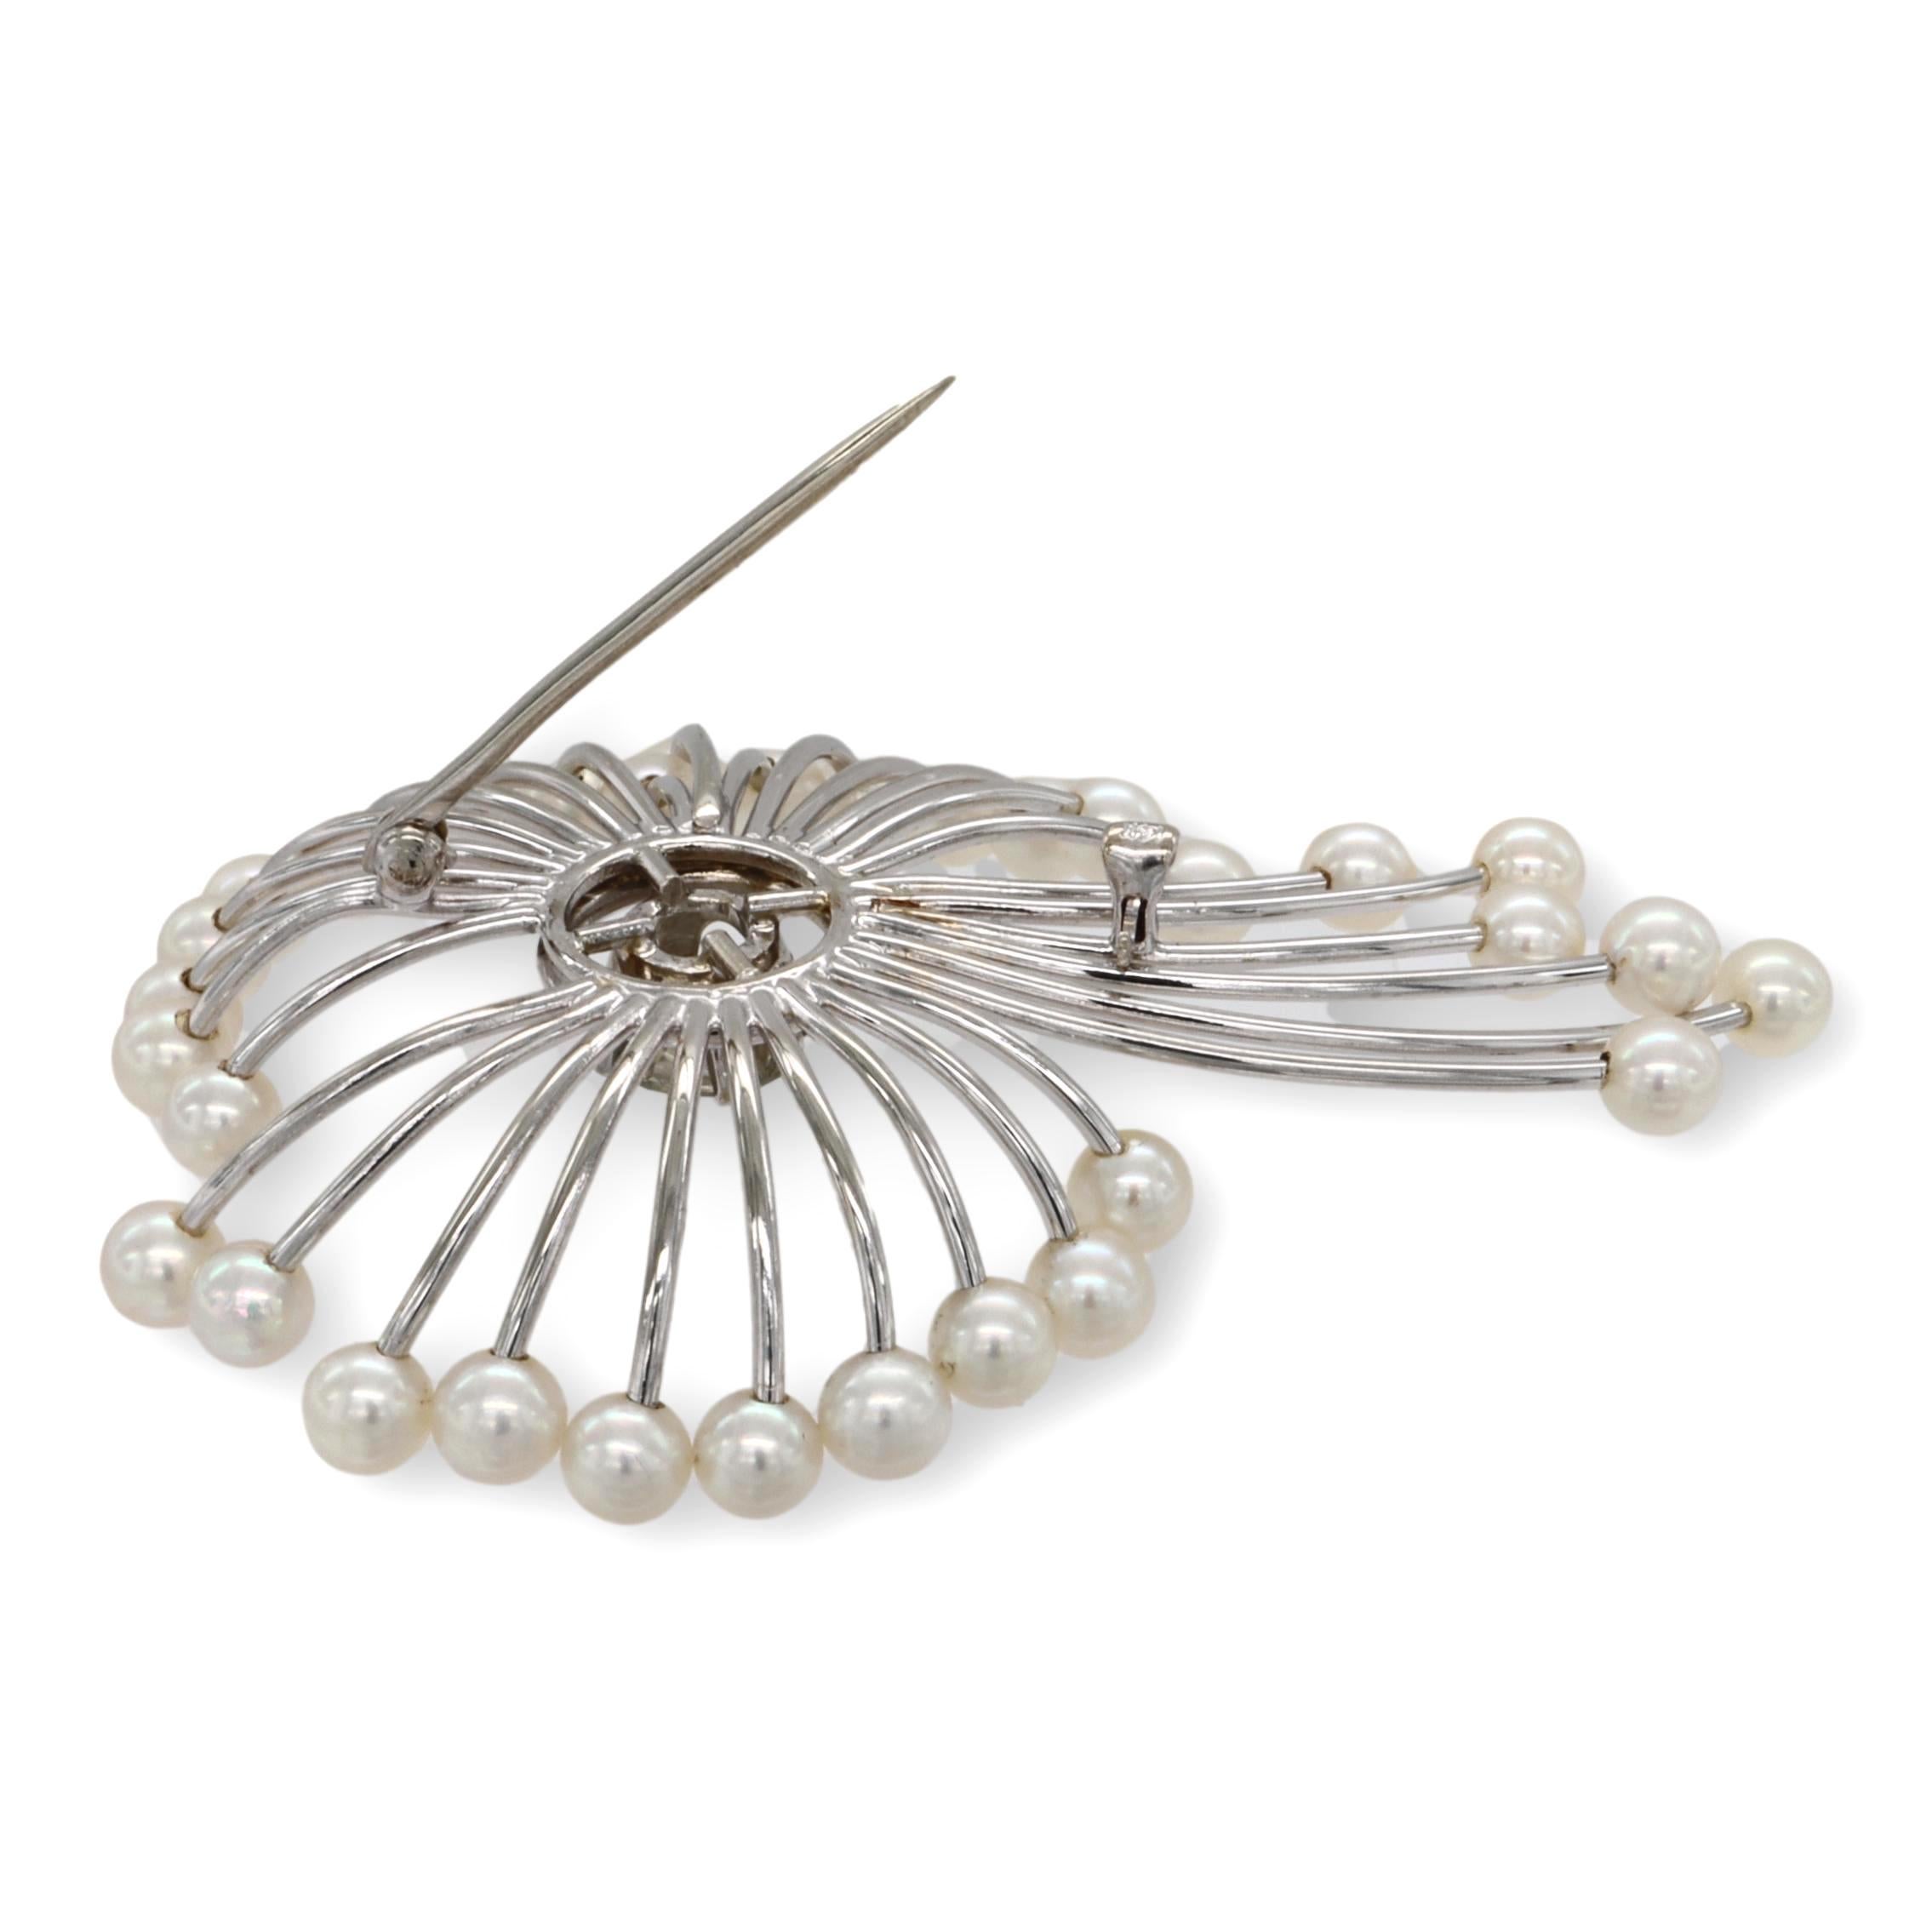 Vintage 14K White Gold 1.25ct. Old-European Diamond Akoya Seed Pearl Brooch/Pin In Excellent Condition For Sale In New York, NY